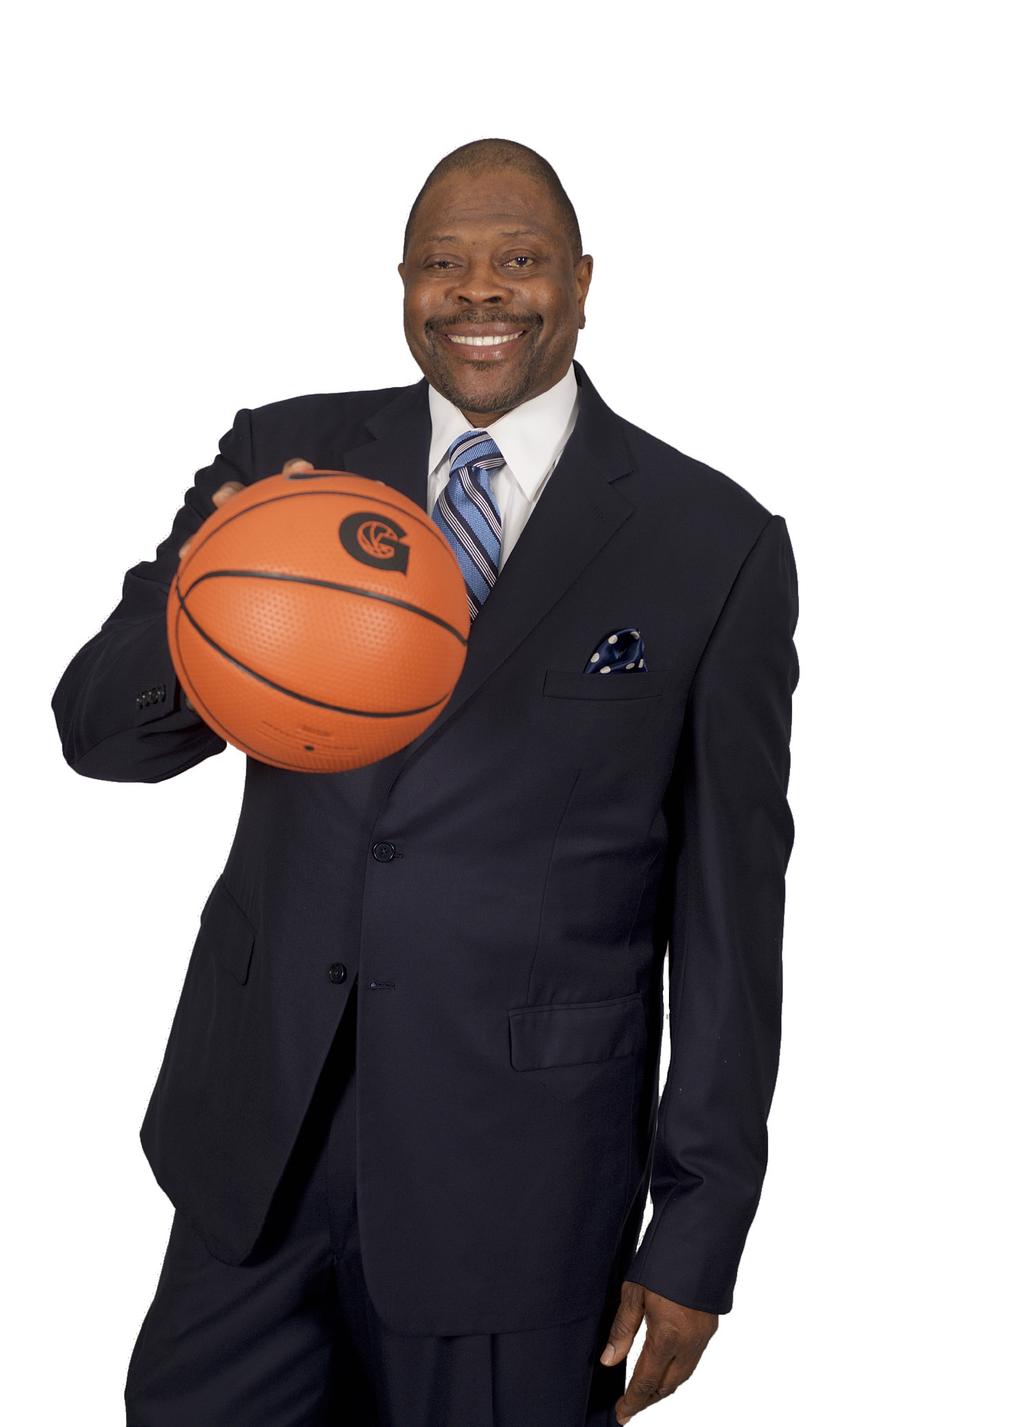 PATRICK EWING HEAD COACH FIRST SEASON GEORGETOWN C 85 Georgetown University announced on April 3, 2017 that Patrick Ewing (C 85) was named its new head men s basketball coach.